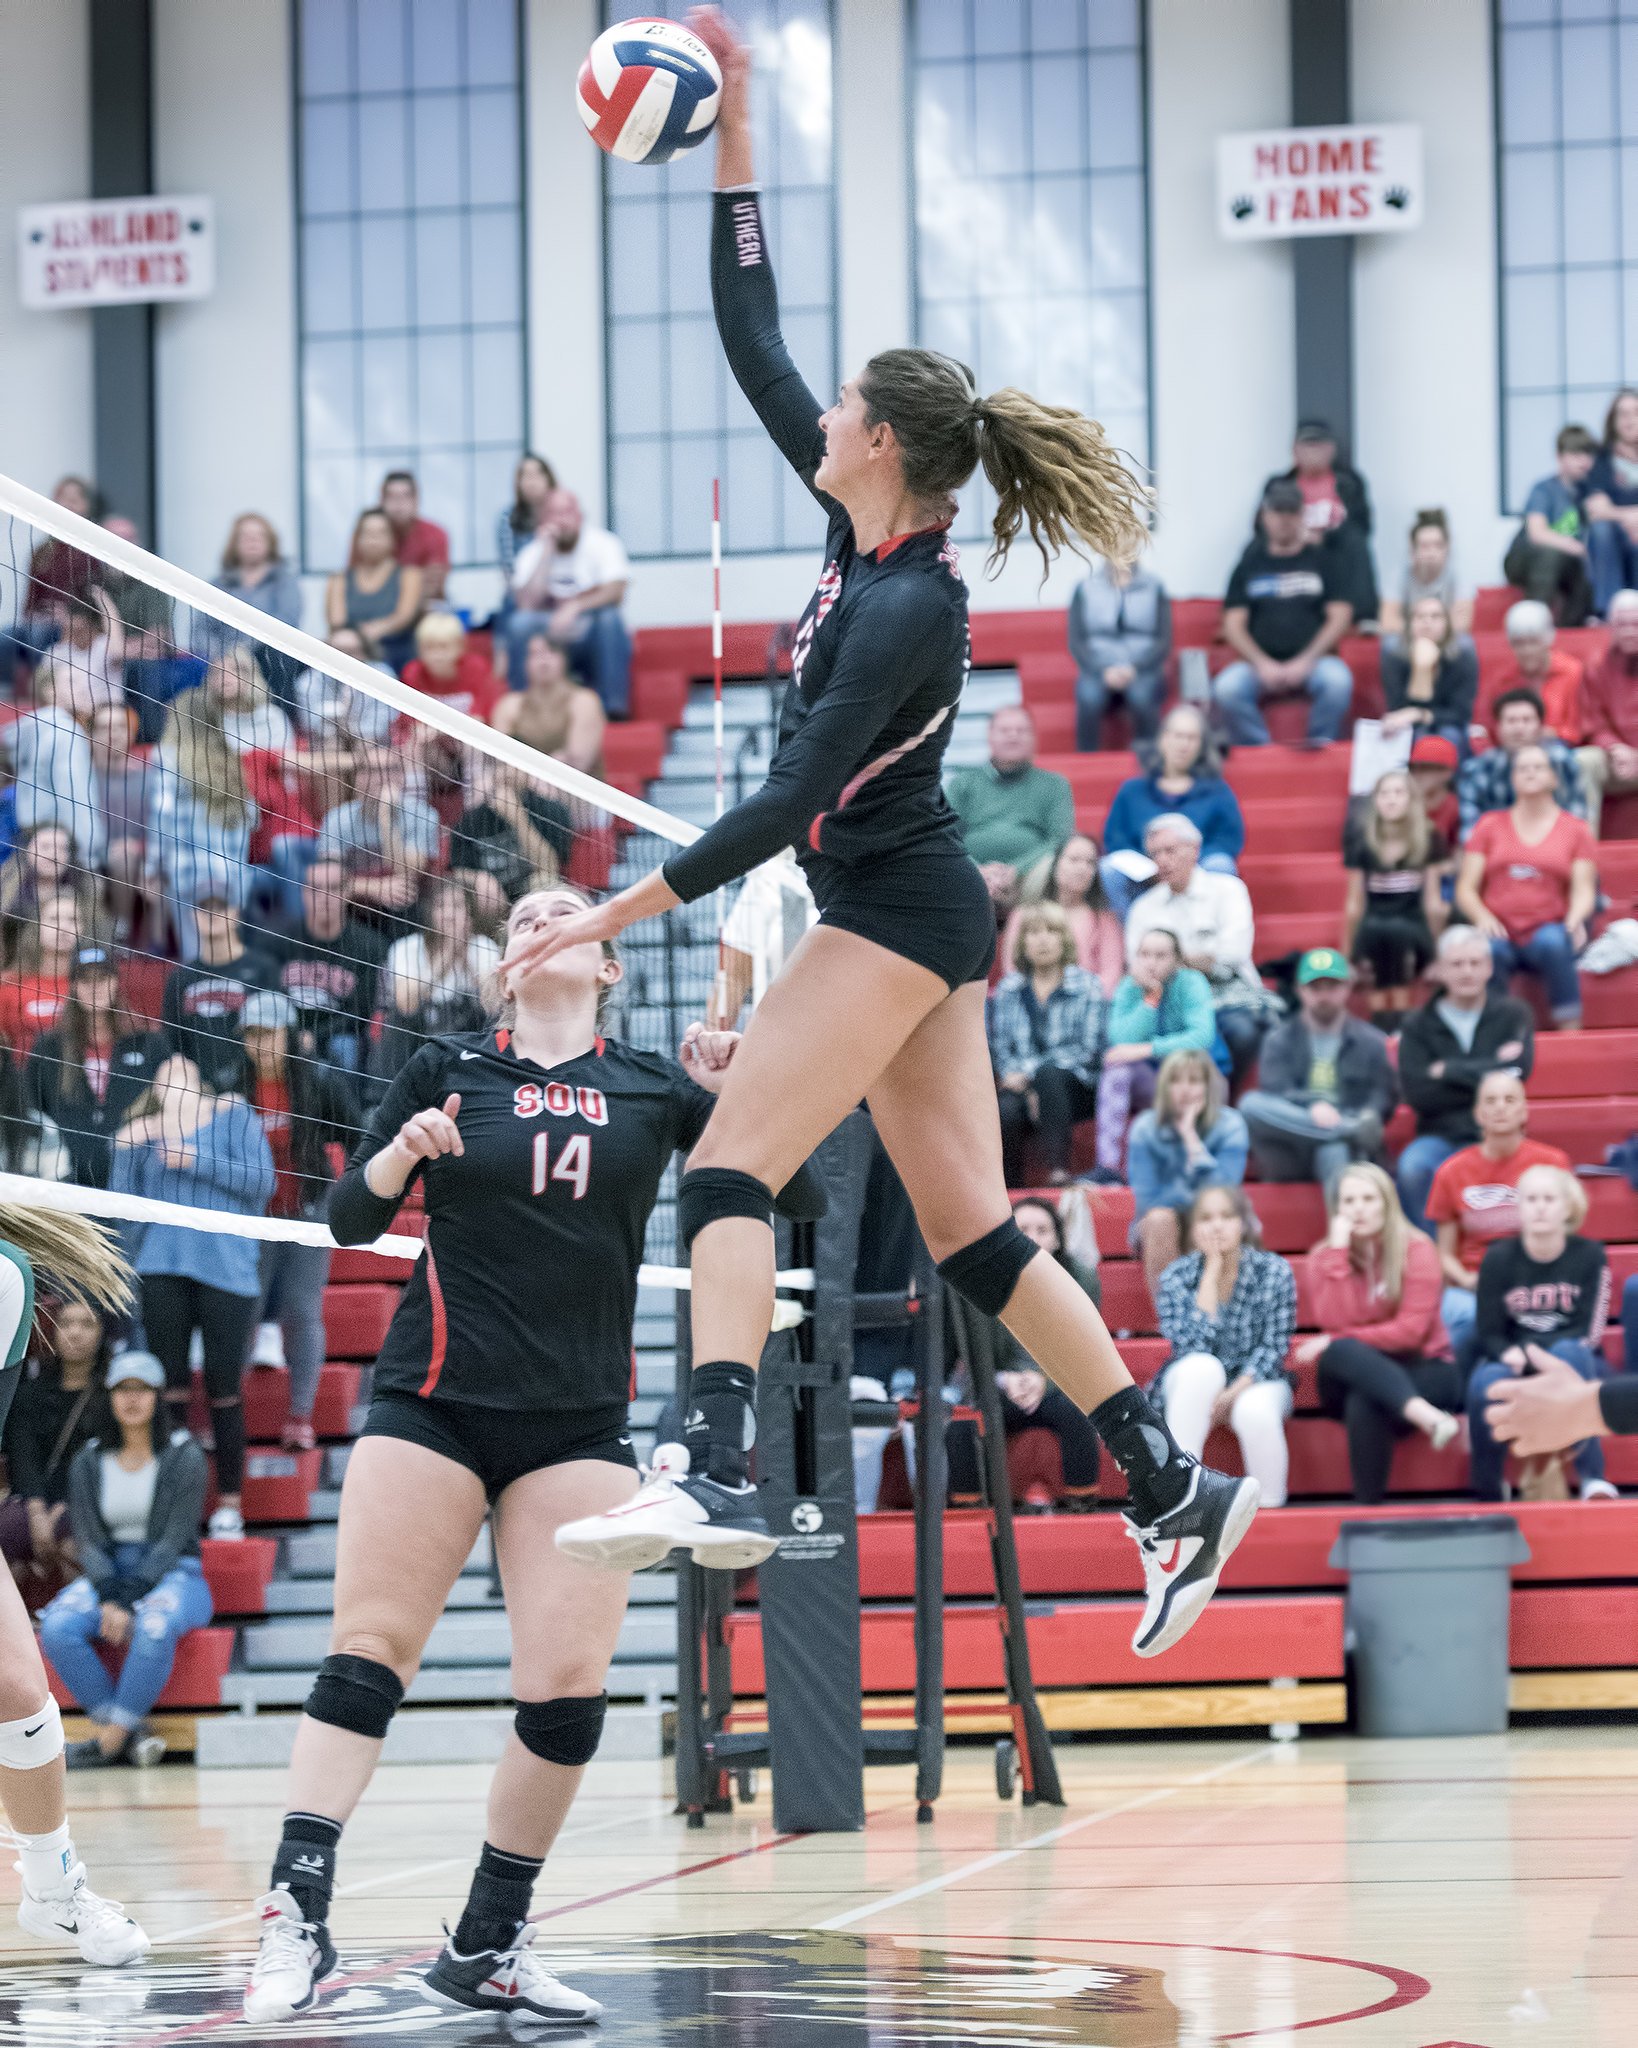 These middle blocker tips help you decide if you need to block certain hitters cross court or down the line and what team blocking strategies are going to be. 